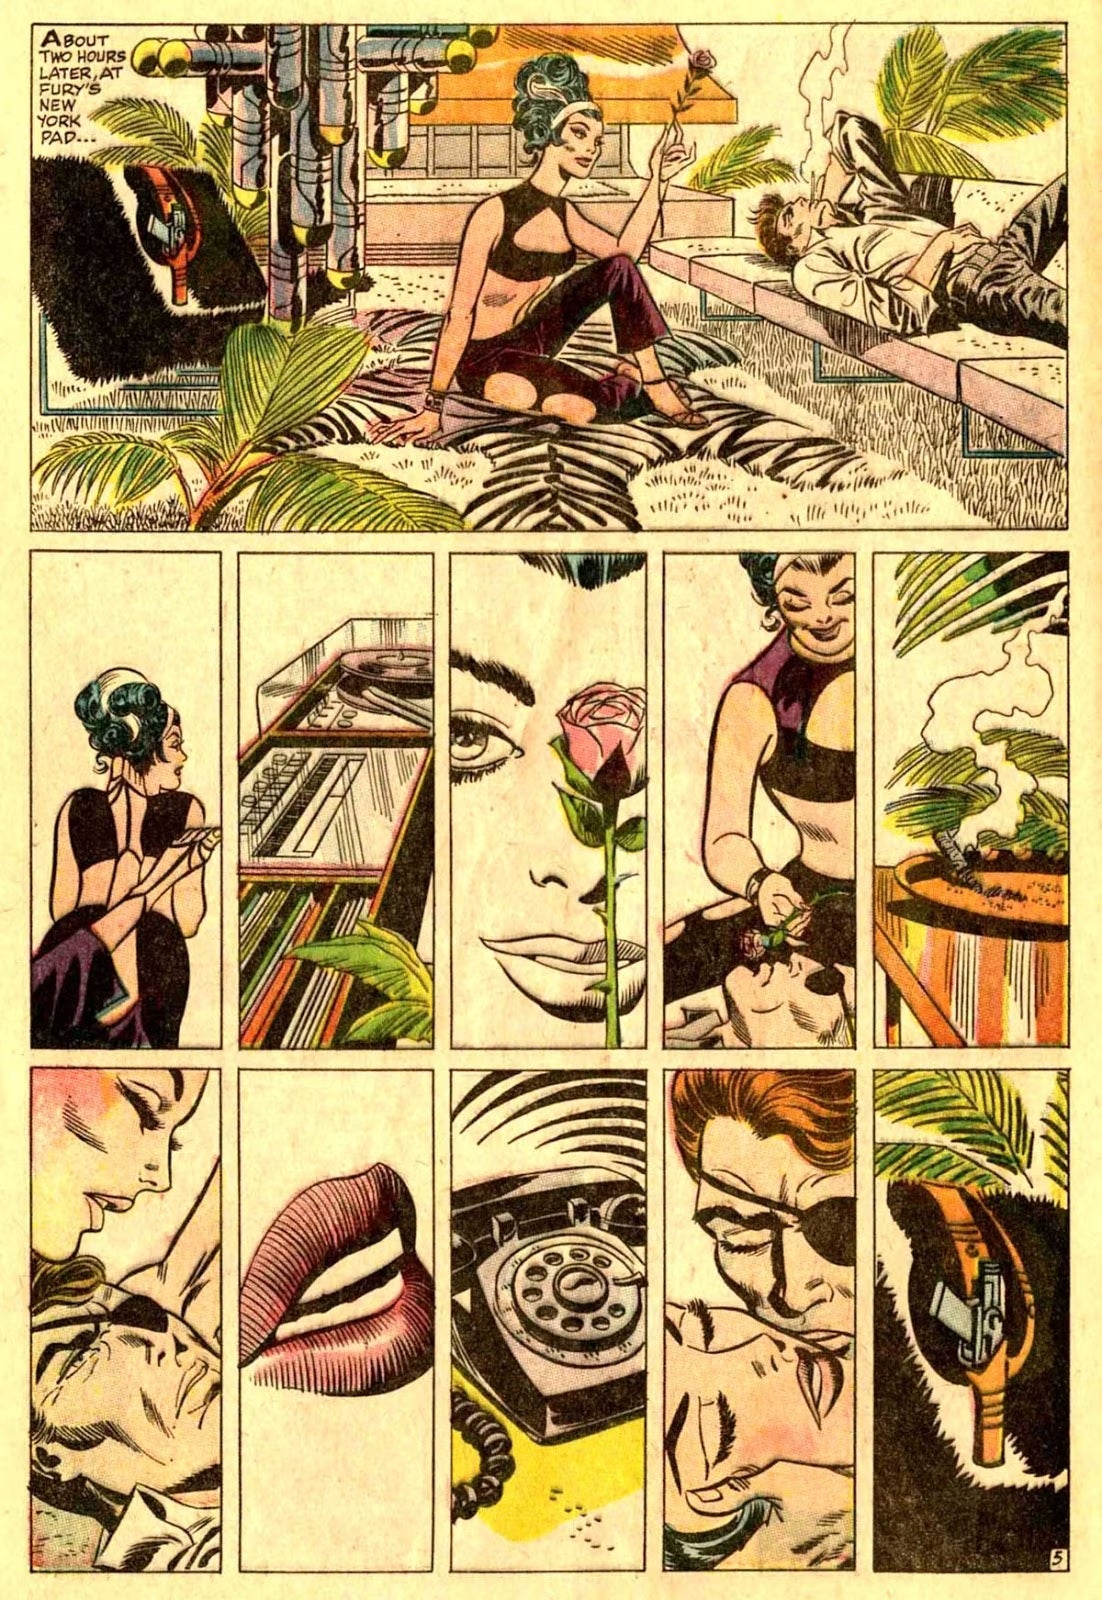 Published version of the seduction scene (art by Jim Steranko)